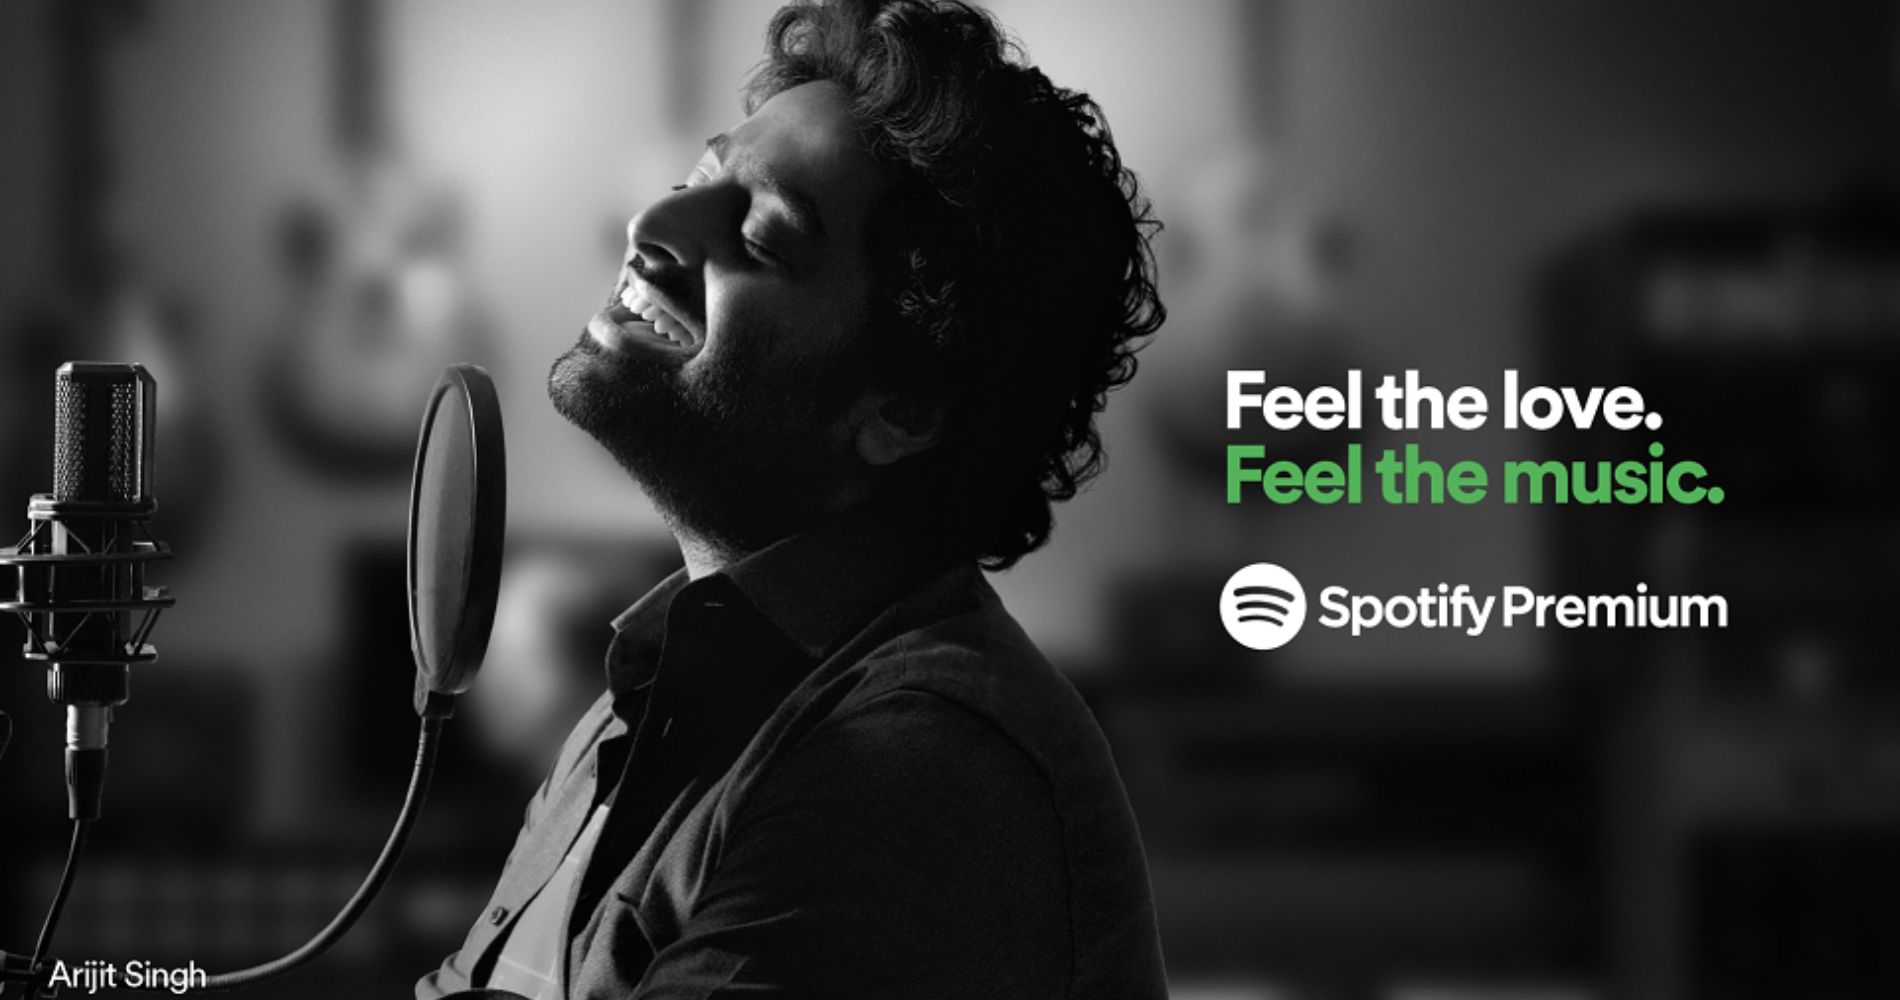 Spotify's Premium Campaign Invites You to 'Feel The Music'